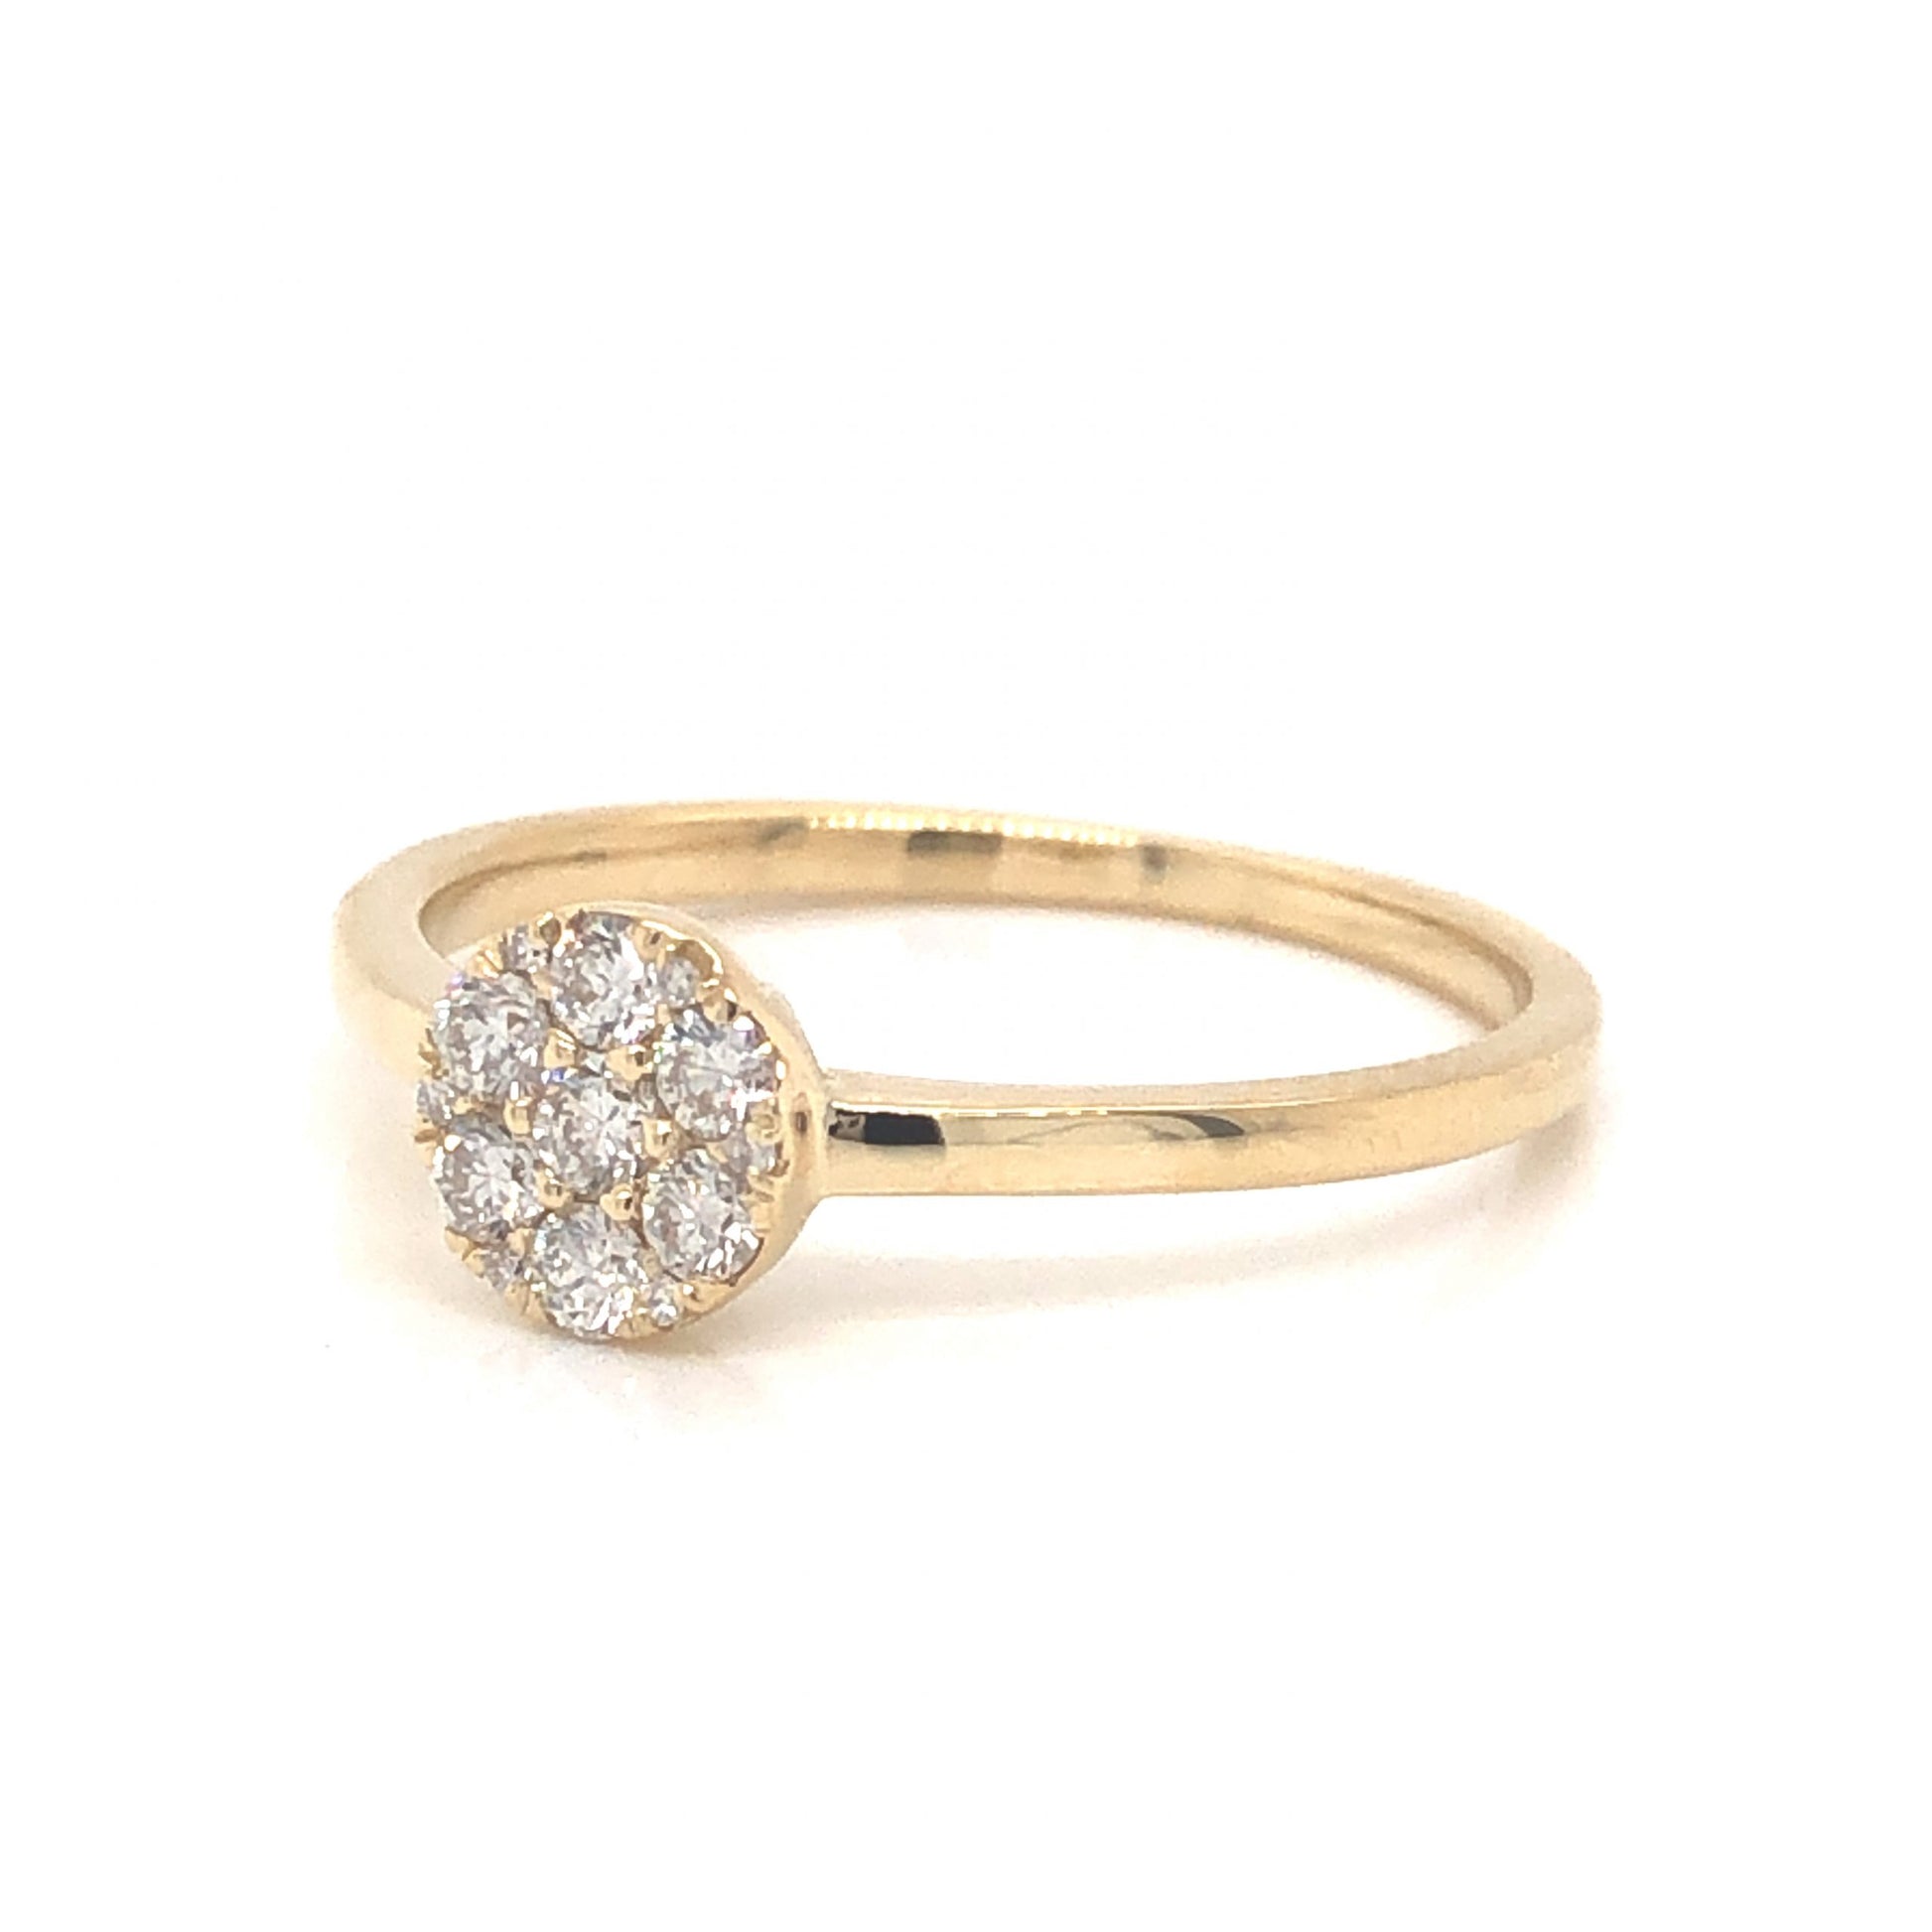 .26 Pave Diamond Stacking Ring in 14k Yellow GoldComposition: 14 Karat Yellow GoldRing Size: 6.5Total Diamond Weight: .26 ctTotal Gram Weight: 1.9 gInscription: 14k 